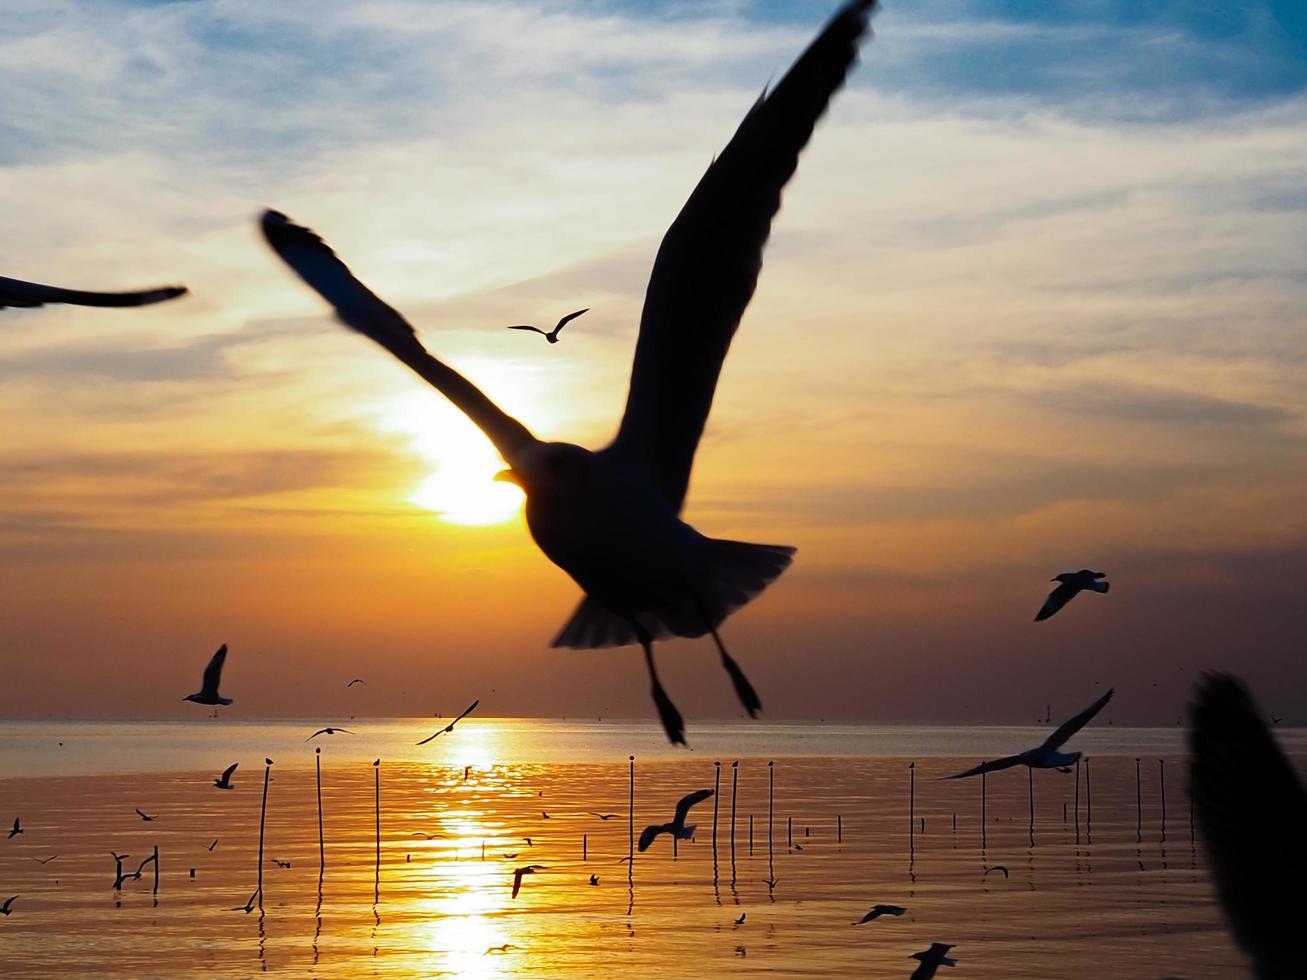 Flock of birds flies above the sea surface. Bird flying back to nest in natural sea and golden sky background during beautiful sunset. photo